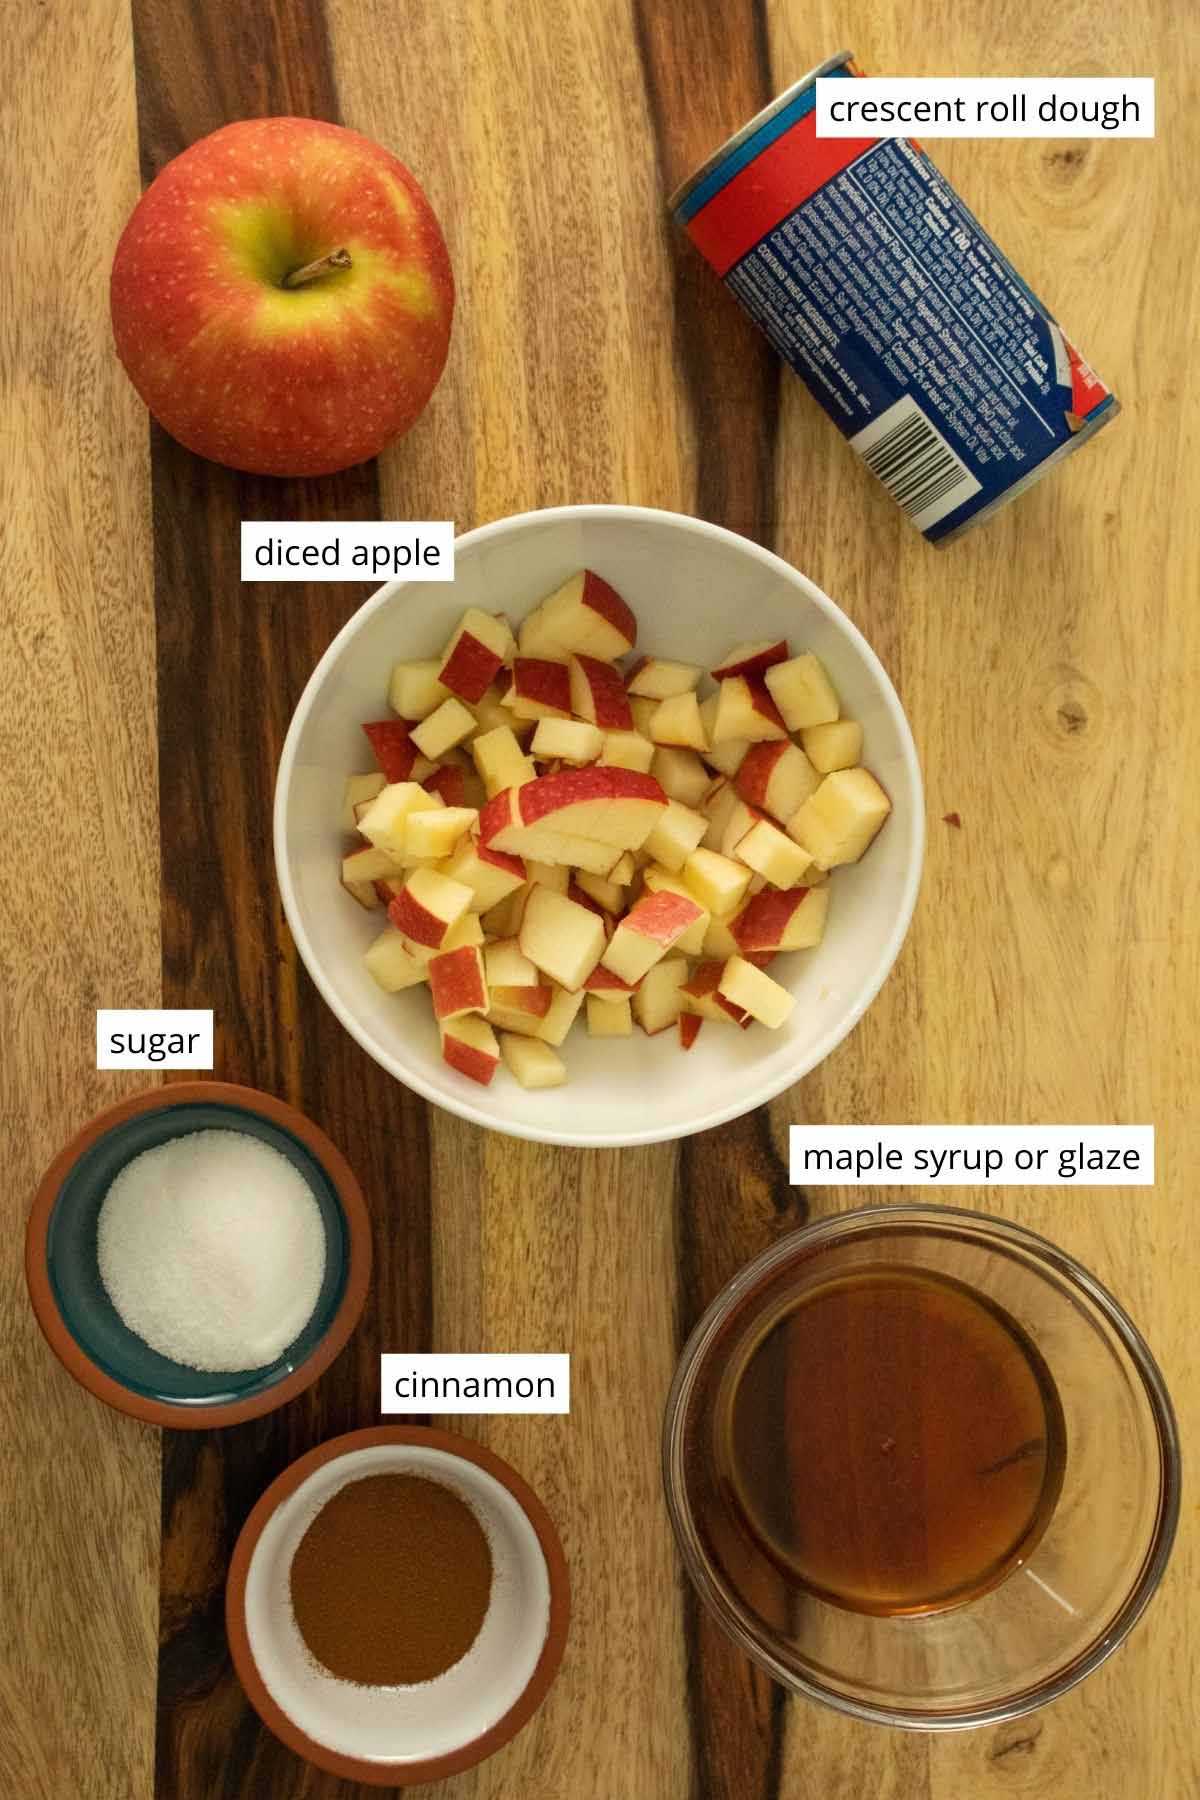 photo of diced apples, crescent roll dough package, cinnamon, sugar, and maple syrup all on a wooden cutting board